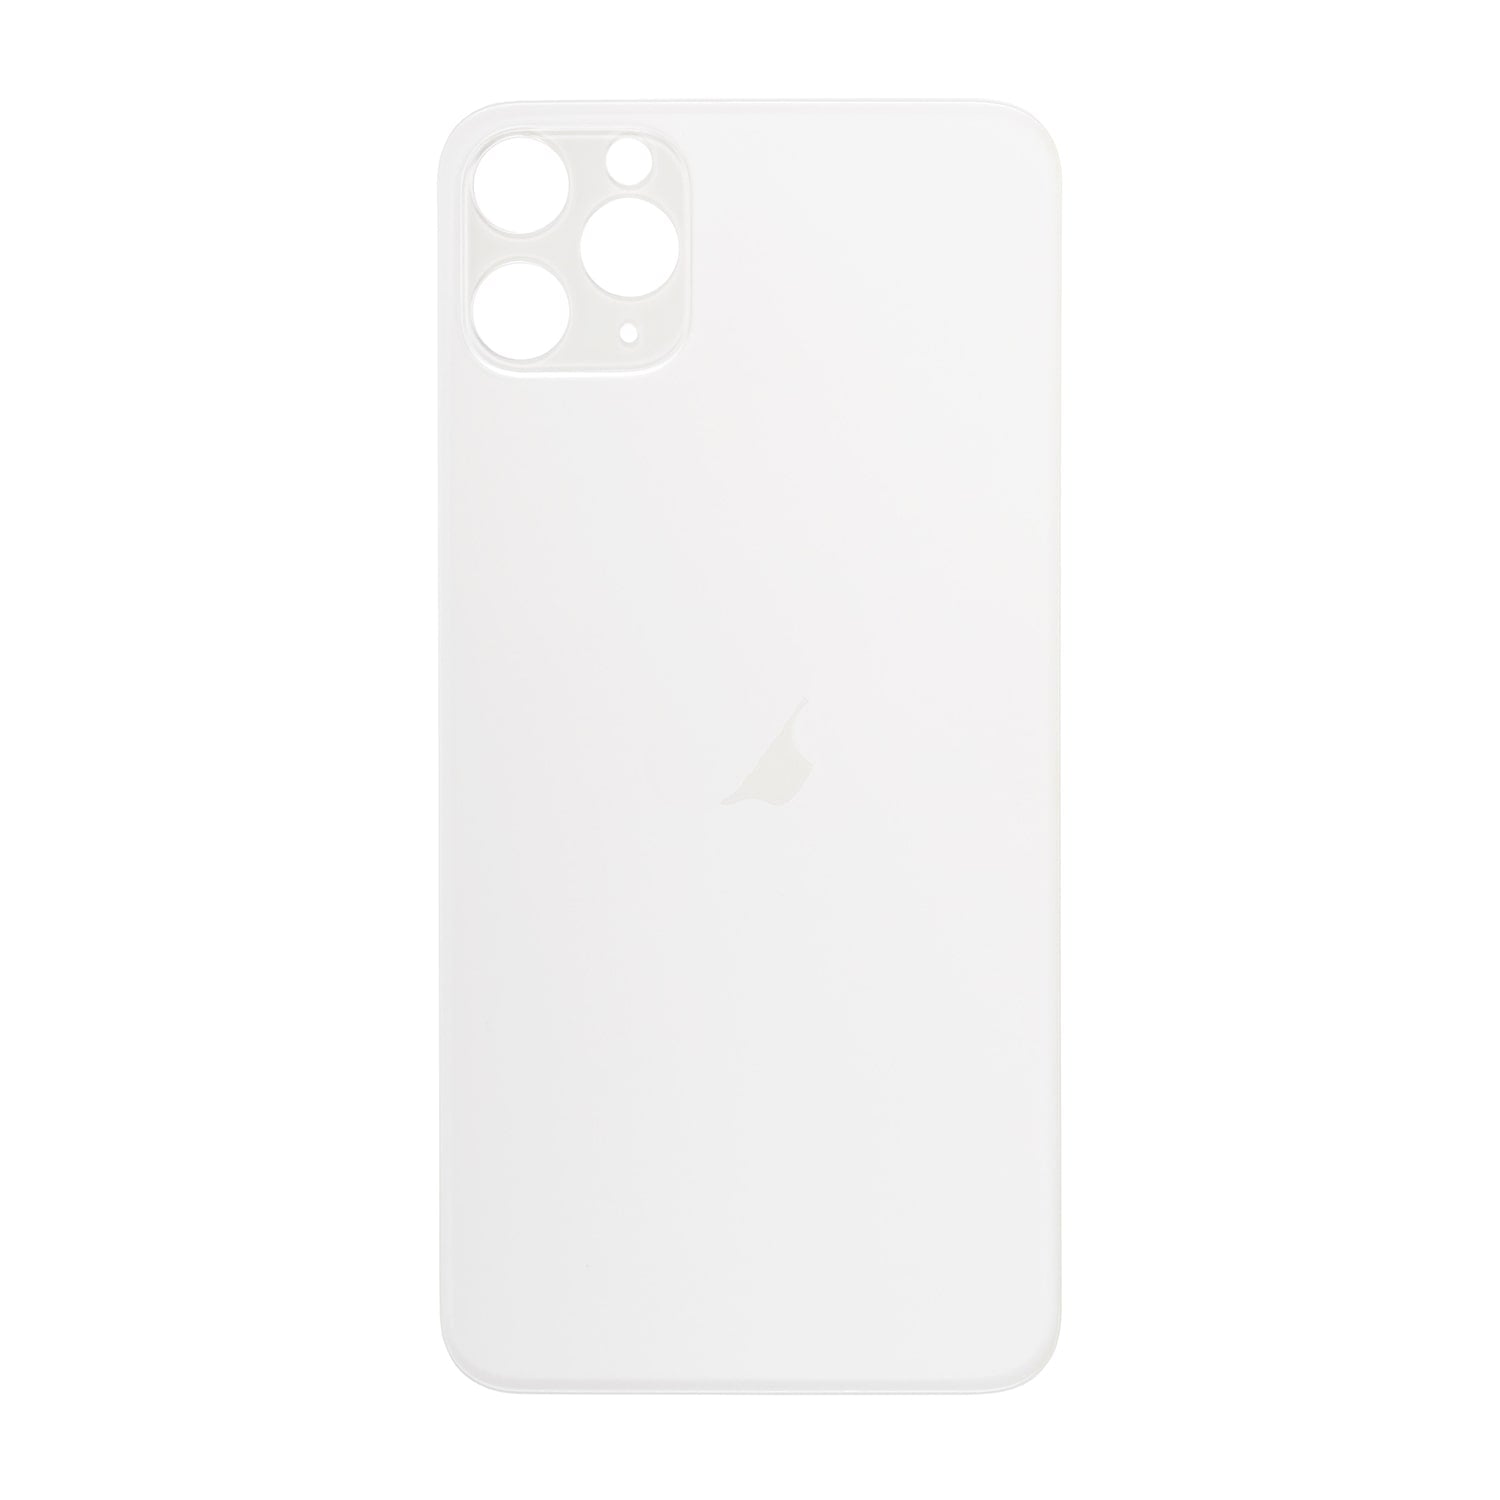 BACK COVER - SILVER FOR IPHONE 11 PRO